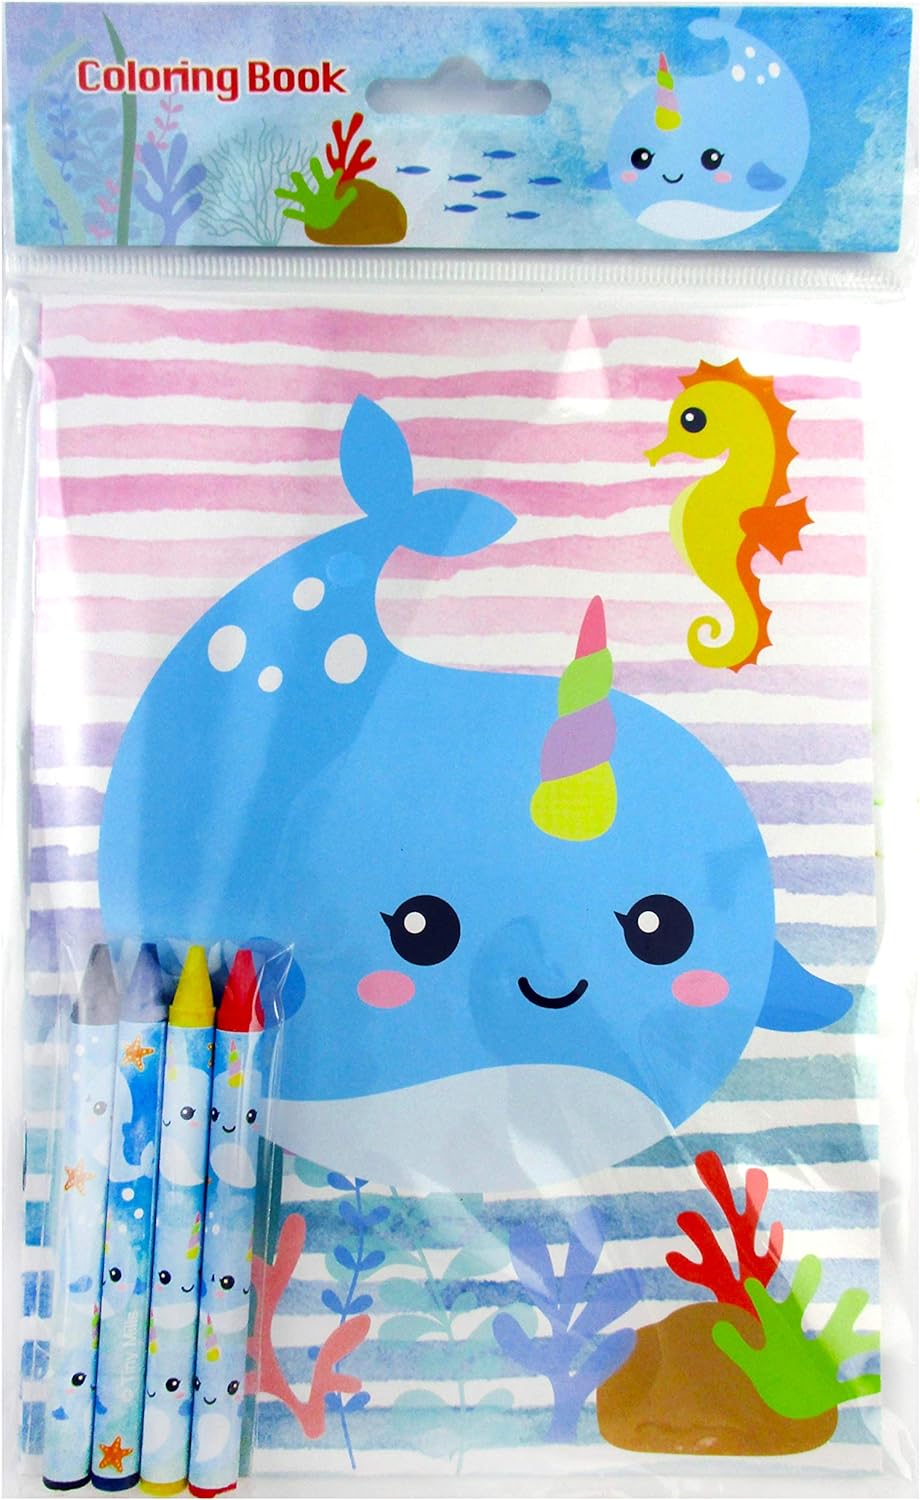 TINYMILLS Narwhals Coloring Book and Crayon Set for Kids Party Favors with 12 Coloring Books and 48 Crayons